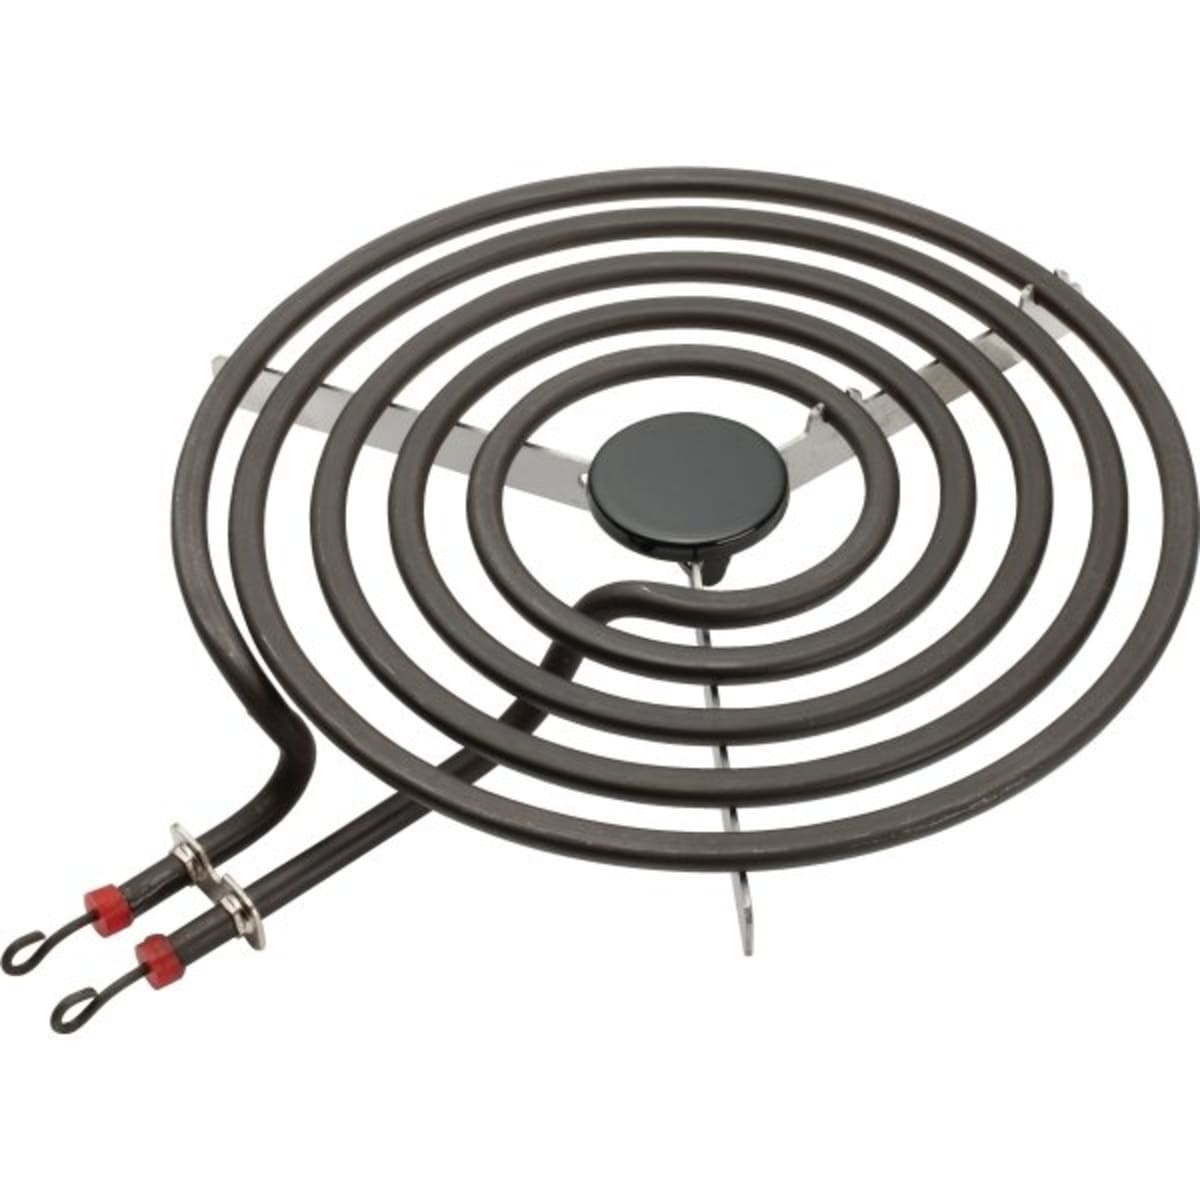 Universal Range Cooktop Stove 6" Small Heavy Duty Surface Burner Heating Element